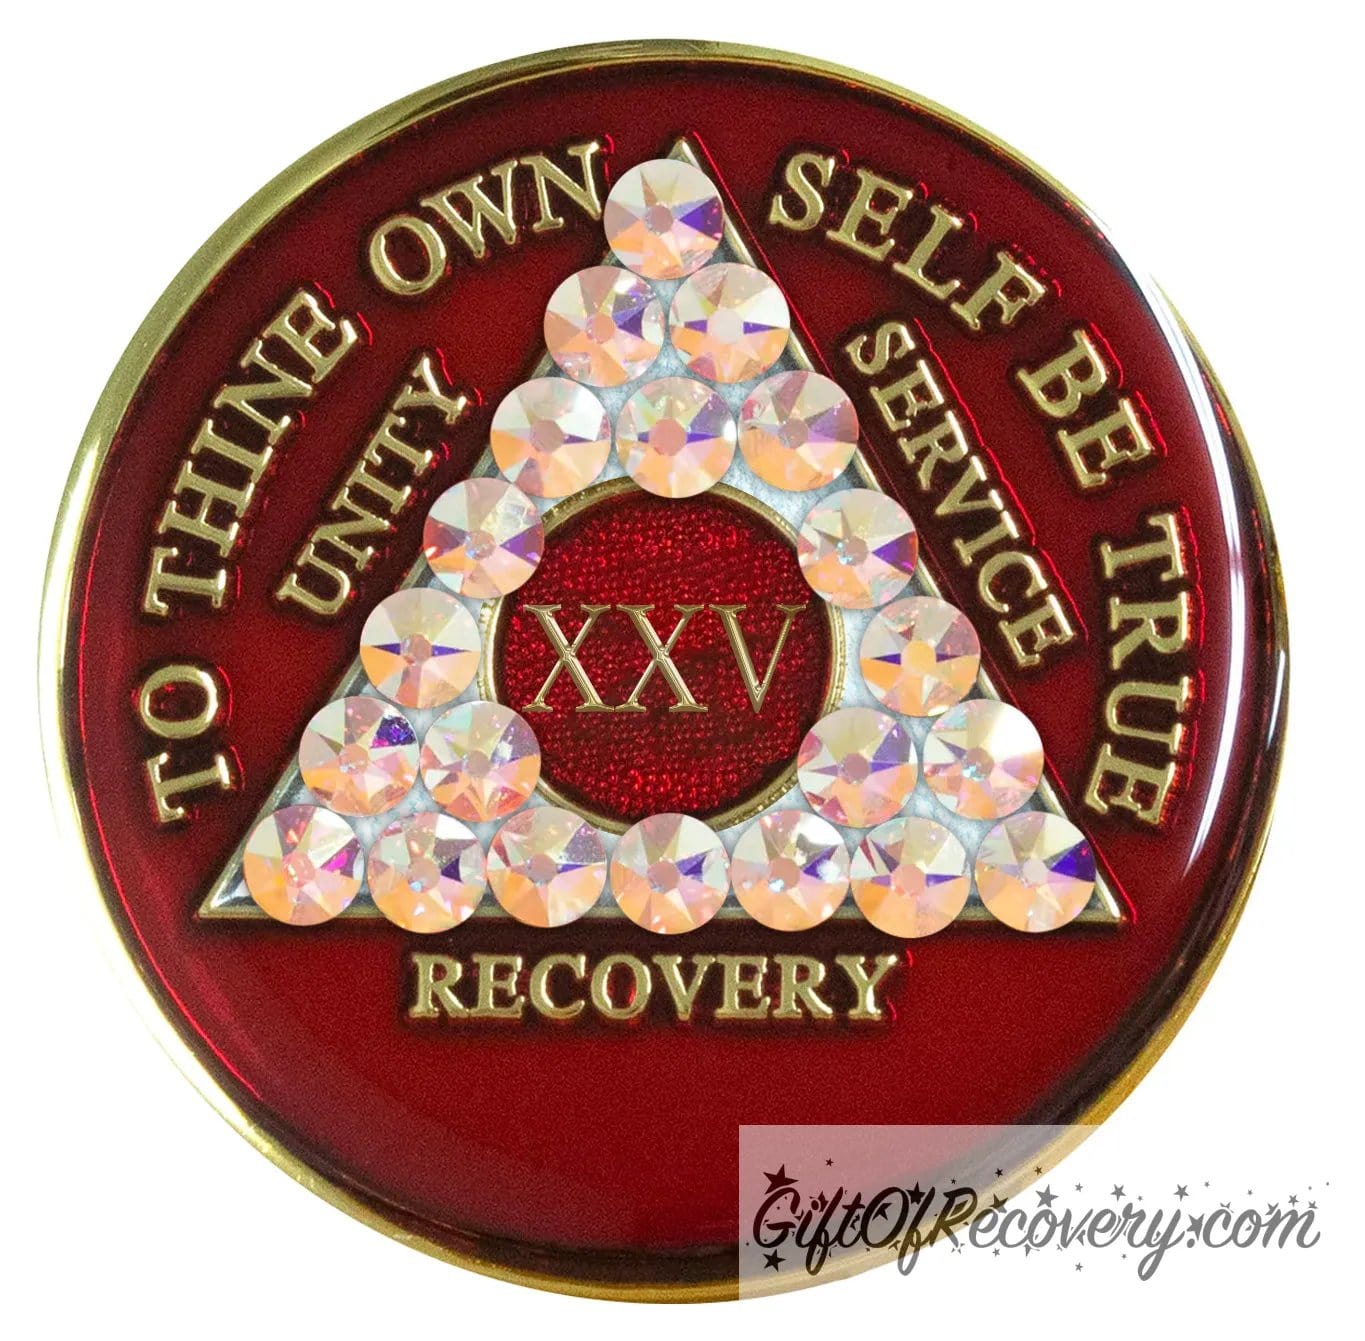 25 year AA medallion ruby red with 21 Aurora Borealis genuine crystals in the shape of the triangle and to thine own self be true, unity, service, recovery, and roman numeral are embossed with 14k gold-plated brass, the medallion is sealed with resin for a shiny finish that lasts.